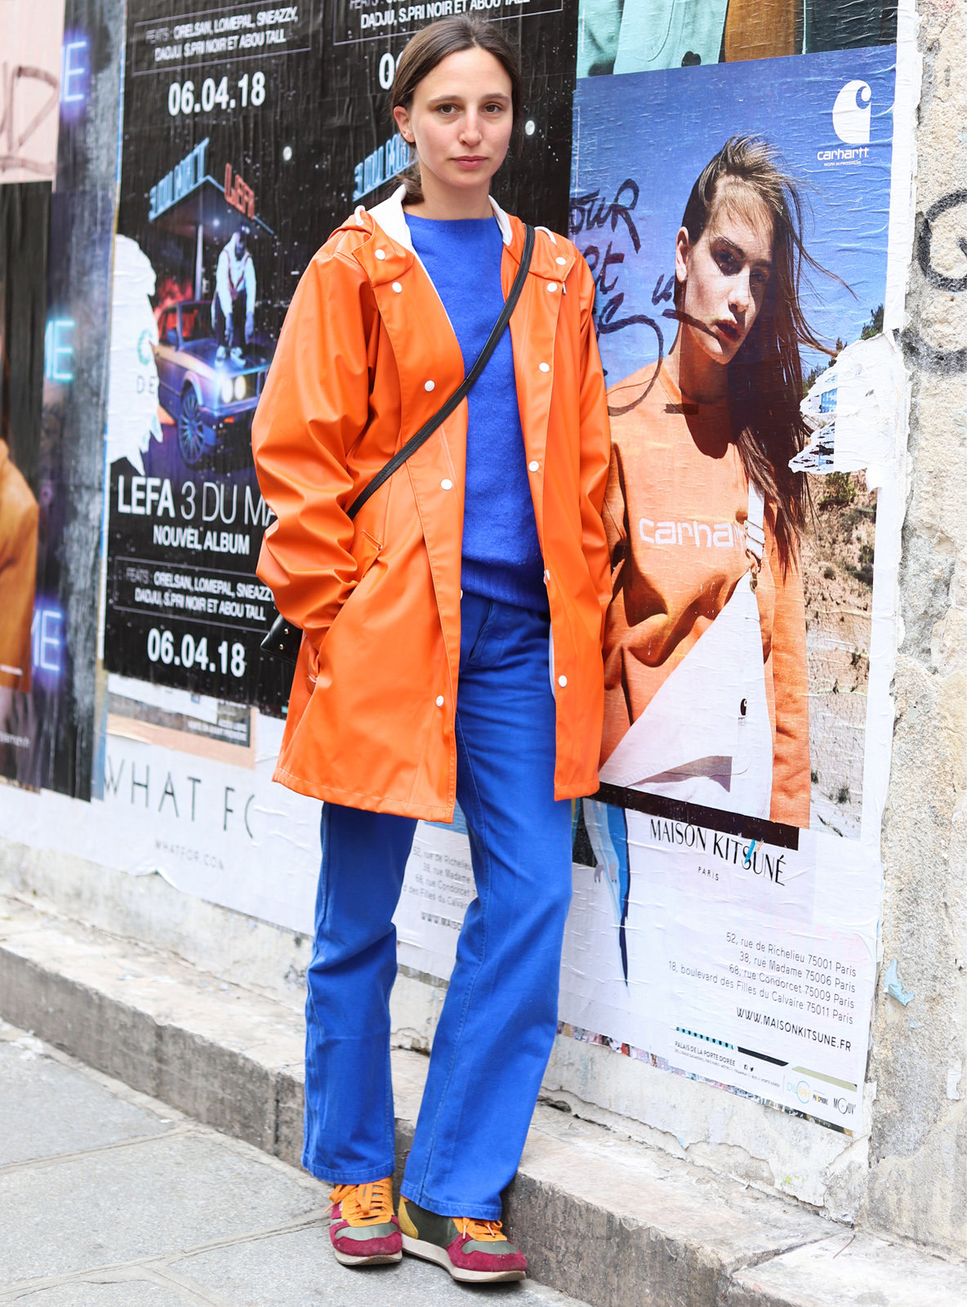 Sleeve, Outerwear, Coat, Style, Street fashion, Orange, Electric blue, Bag, Advertising, Poster, 